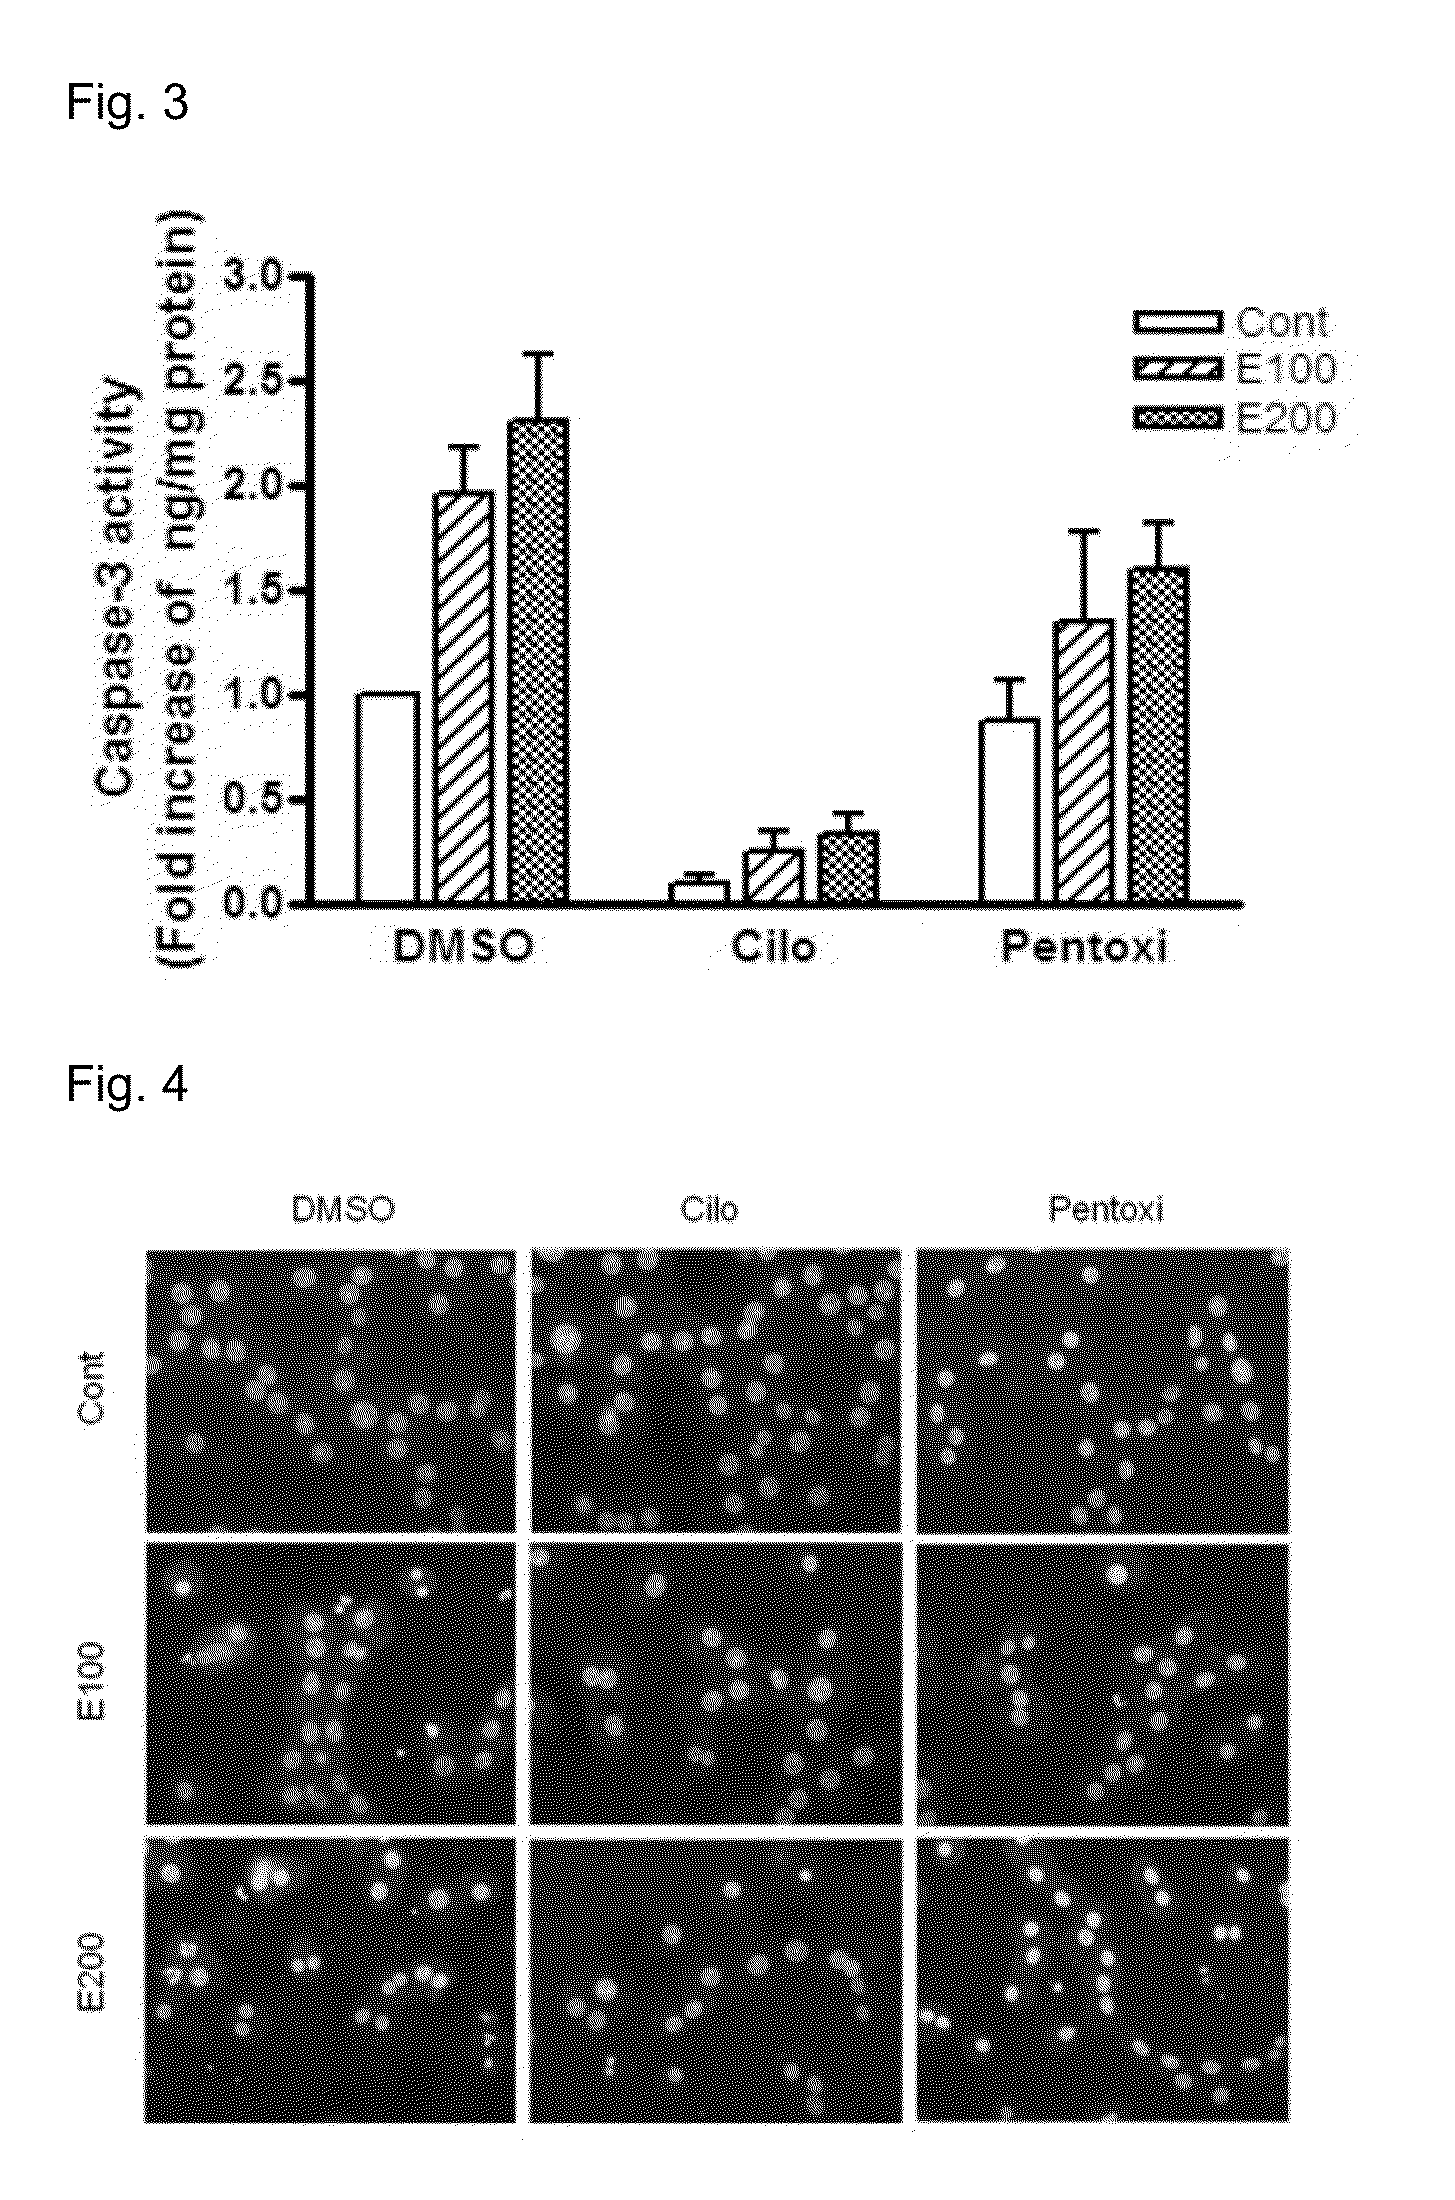 Pharmaceutical composition for treating or preventing alcoholic liver diseases, containing cilostazol as active ingredient